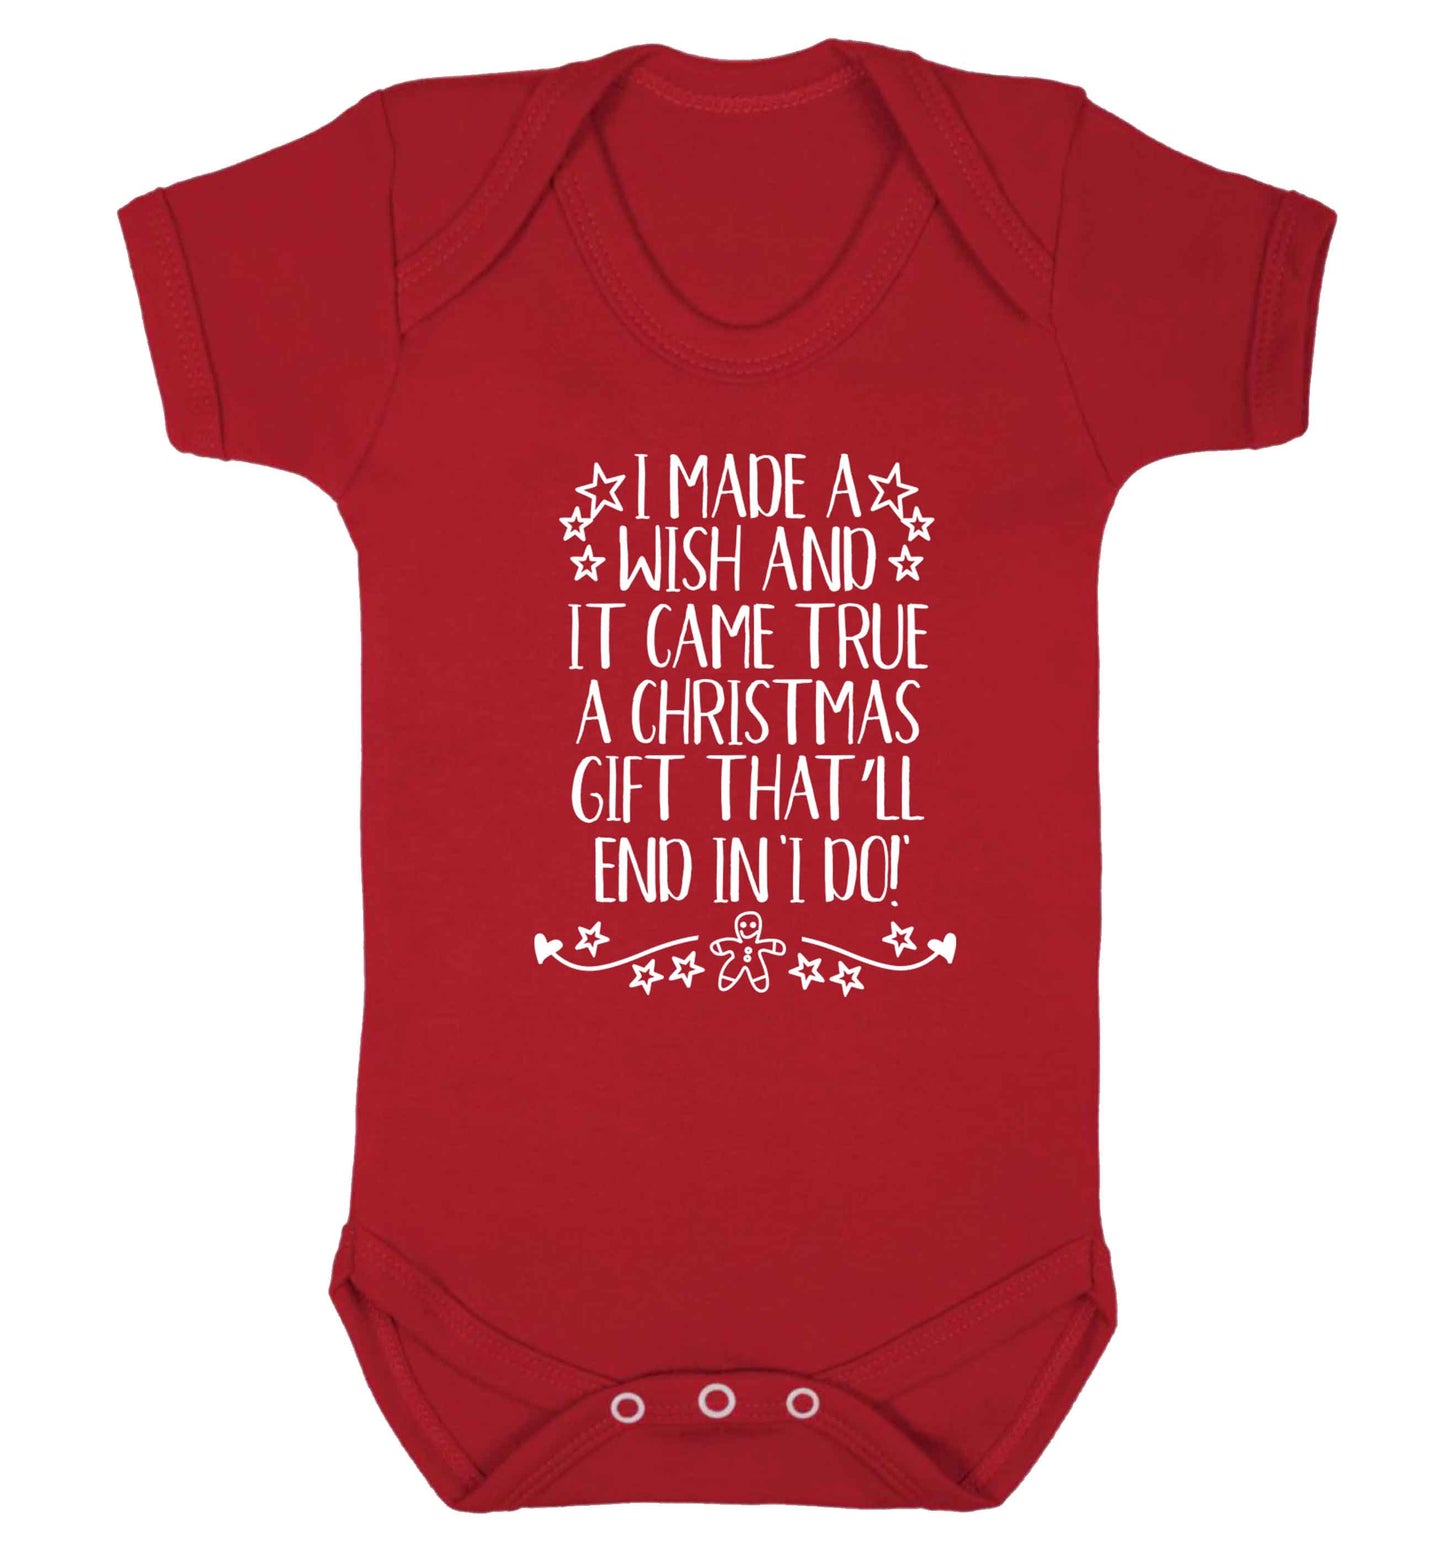 I made a wish and it came true a Christmas gift that'll end in 'I do' Baby Vest red 18-24 months